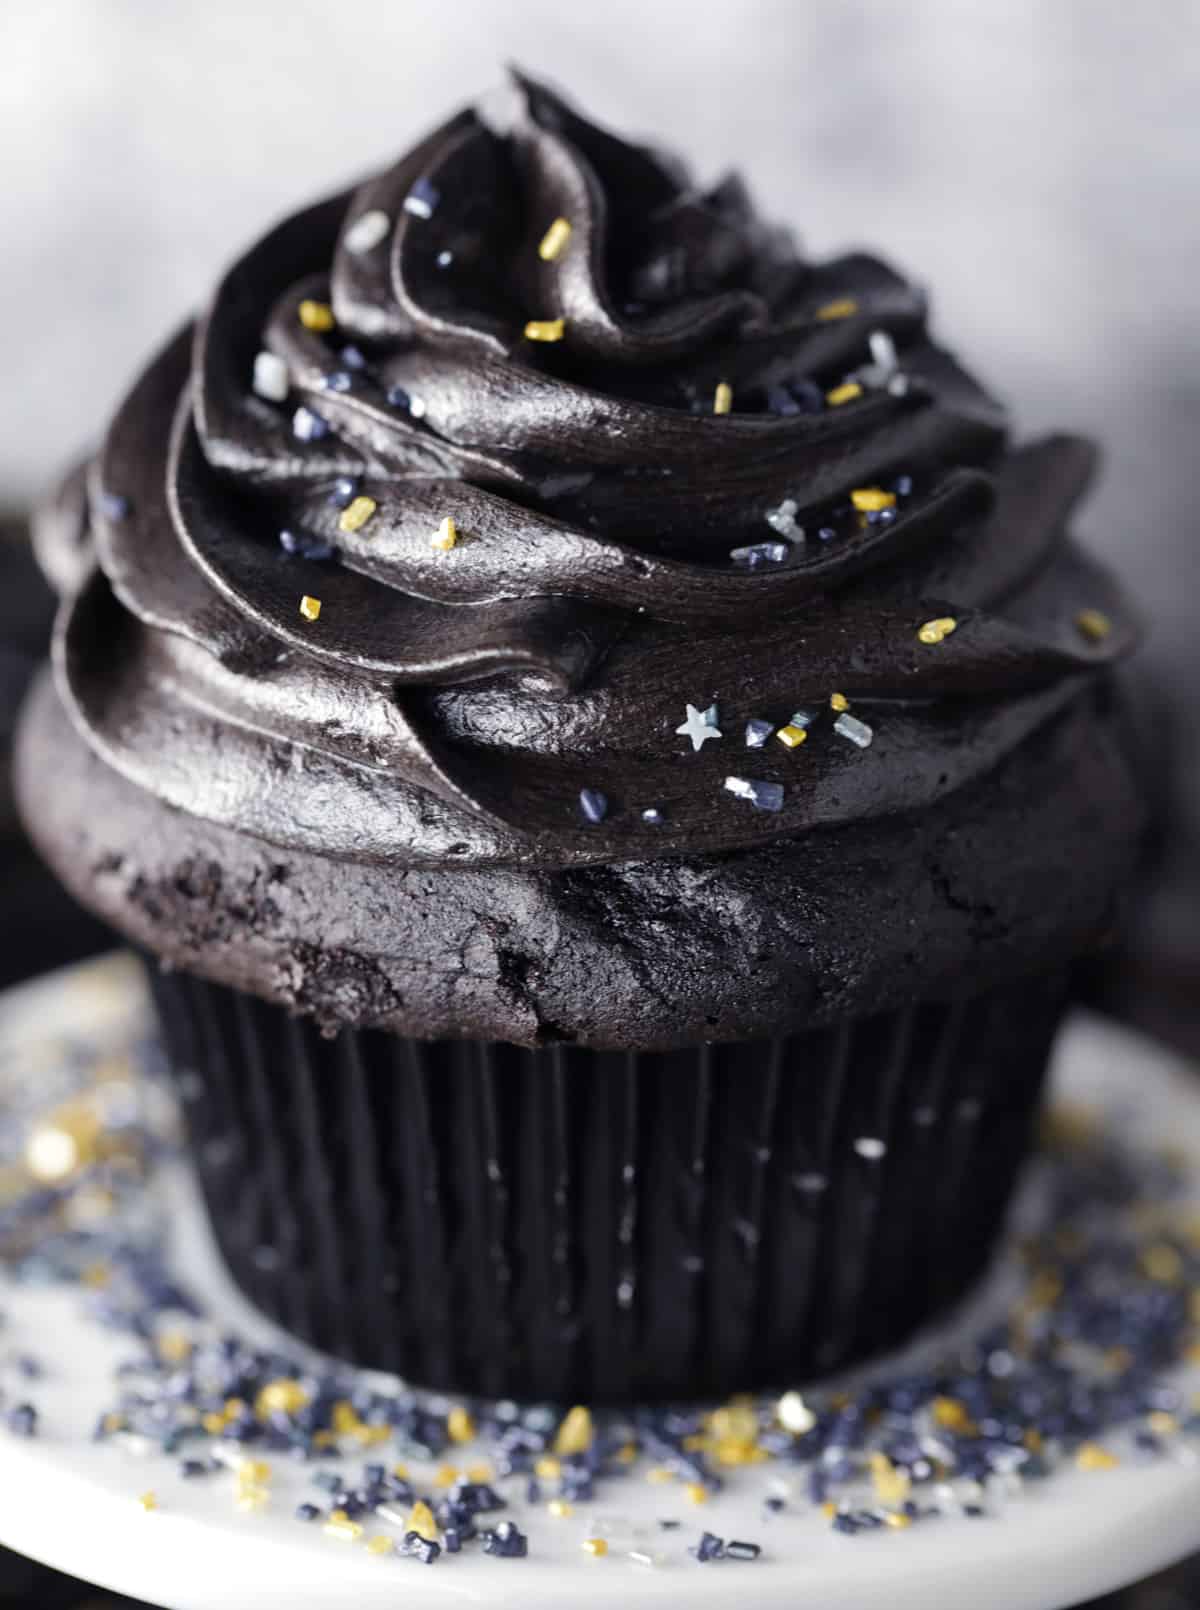 Black frosting on a cupcake.